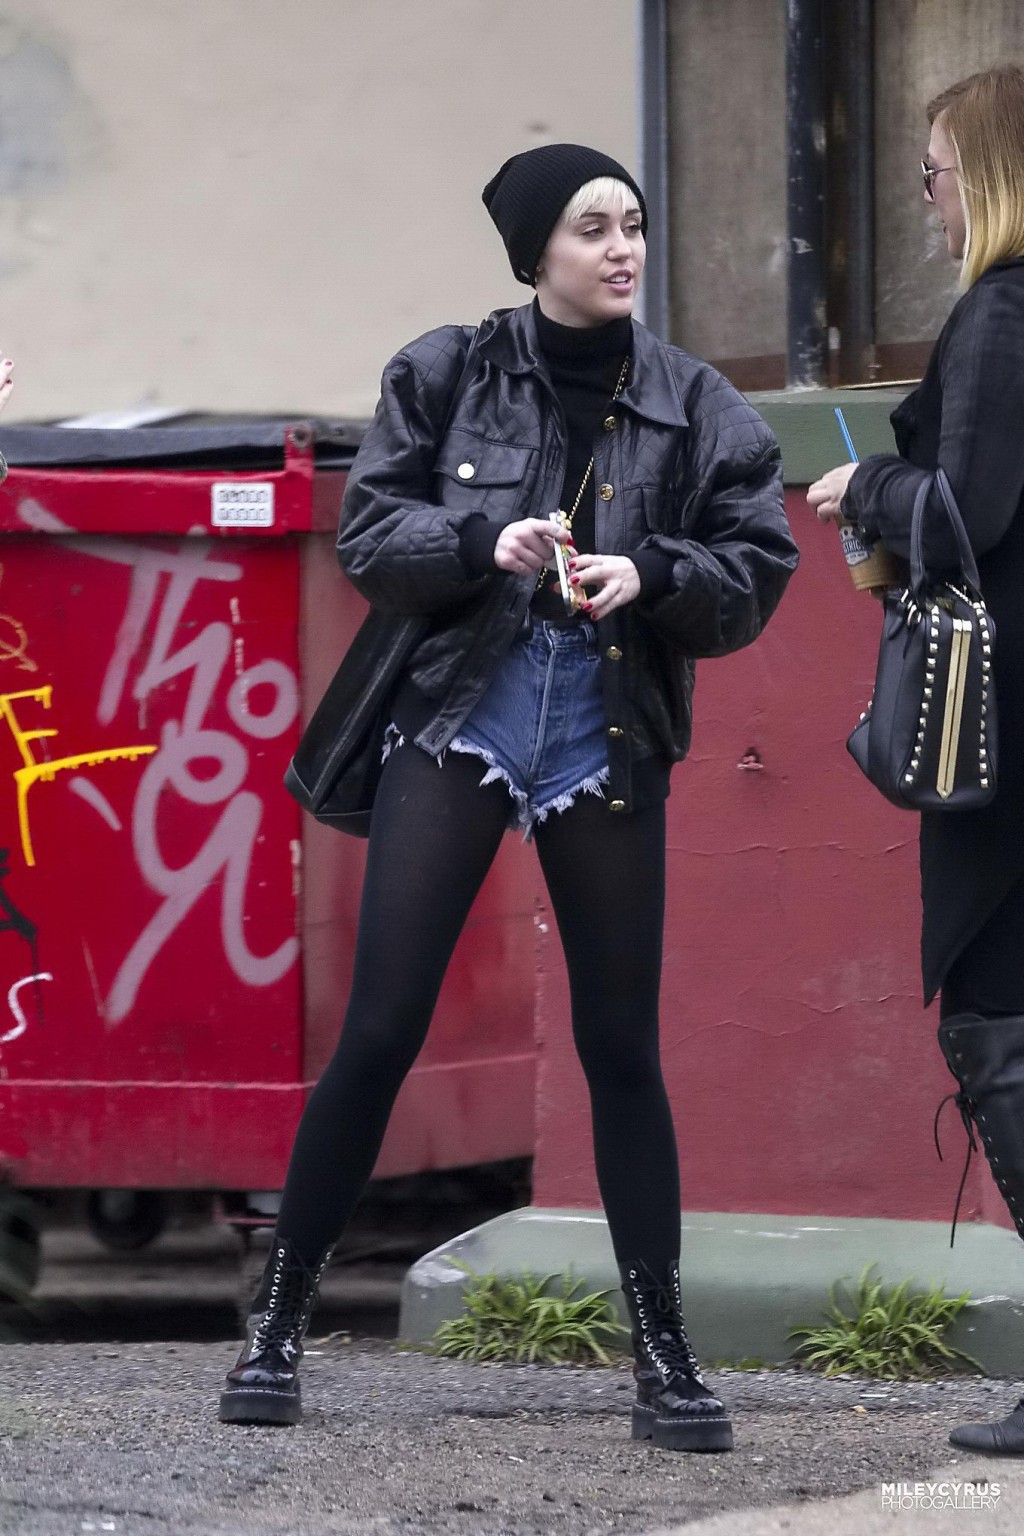 Miley Cyrus shows off her legs and ass wearing the denim shorts  black pantyhose #75201677